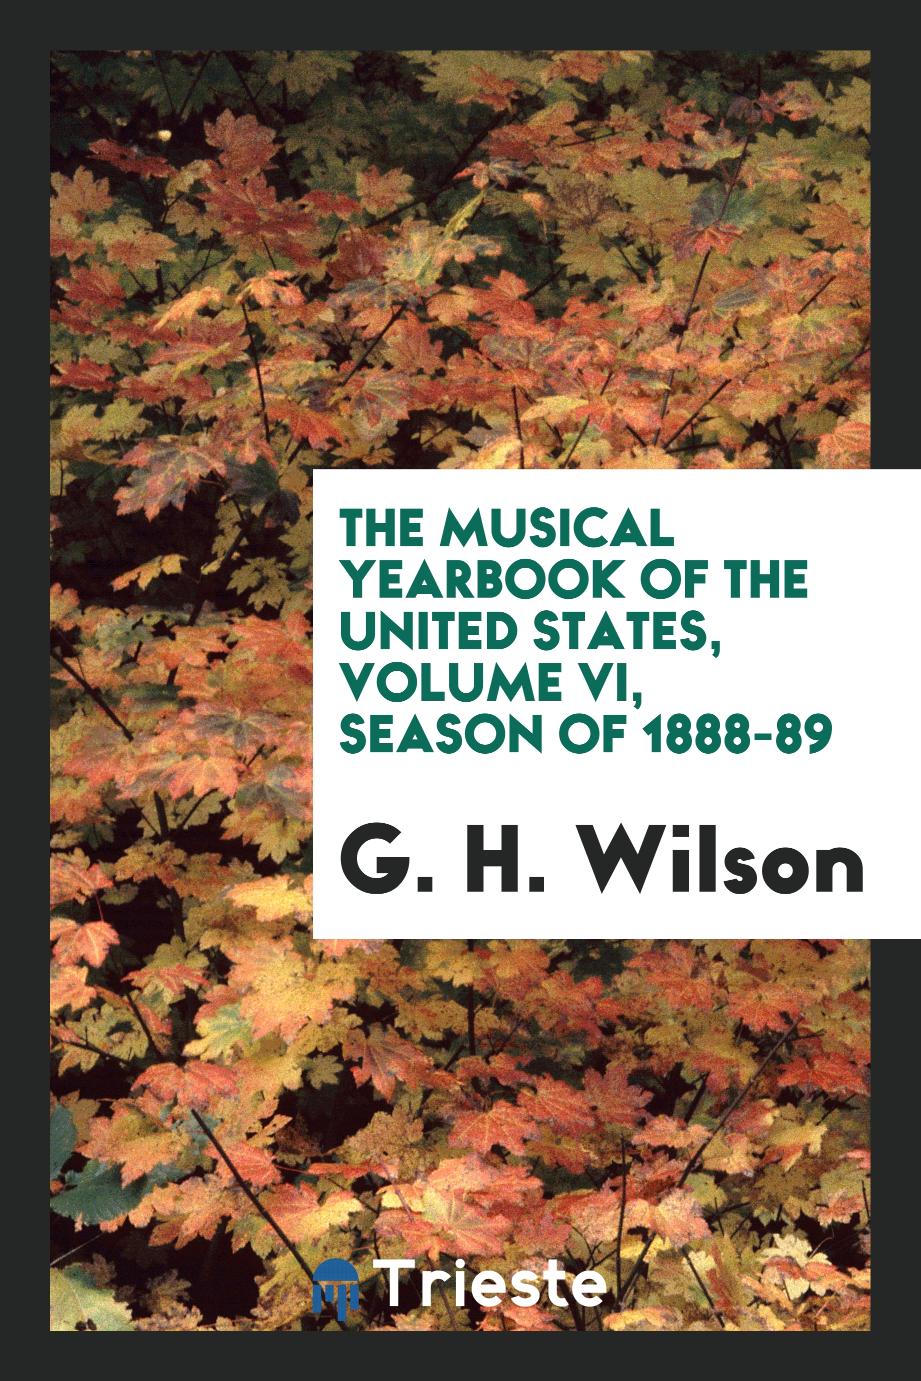 The Musical Yearbook of the United States, Volume VI, Season of 1888-89